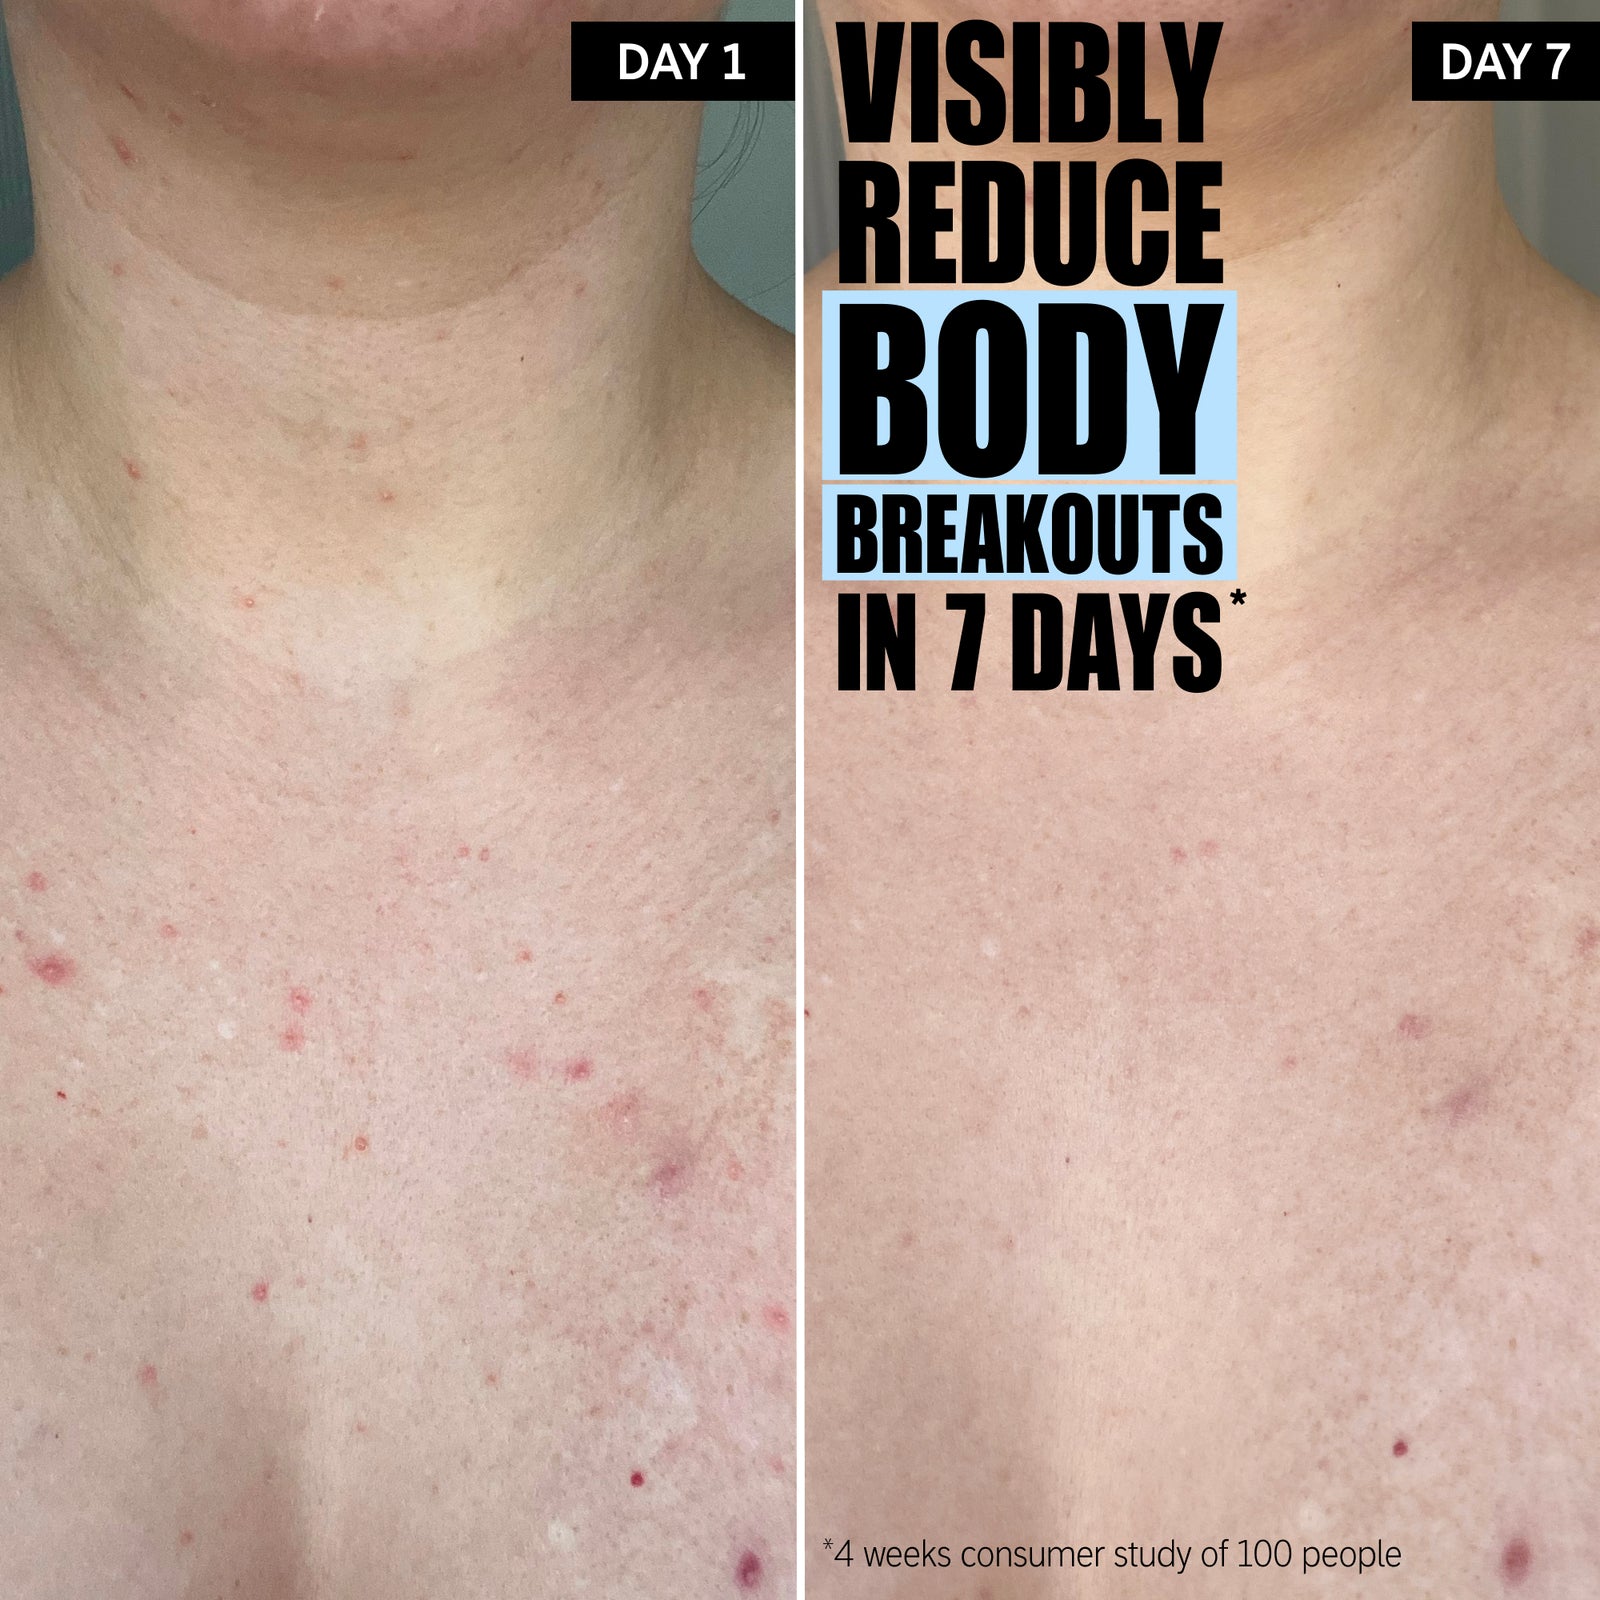 Visibly reduces body breakouts in 7 days*. The progress after use for 7 days.